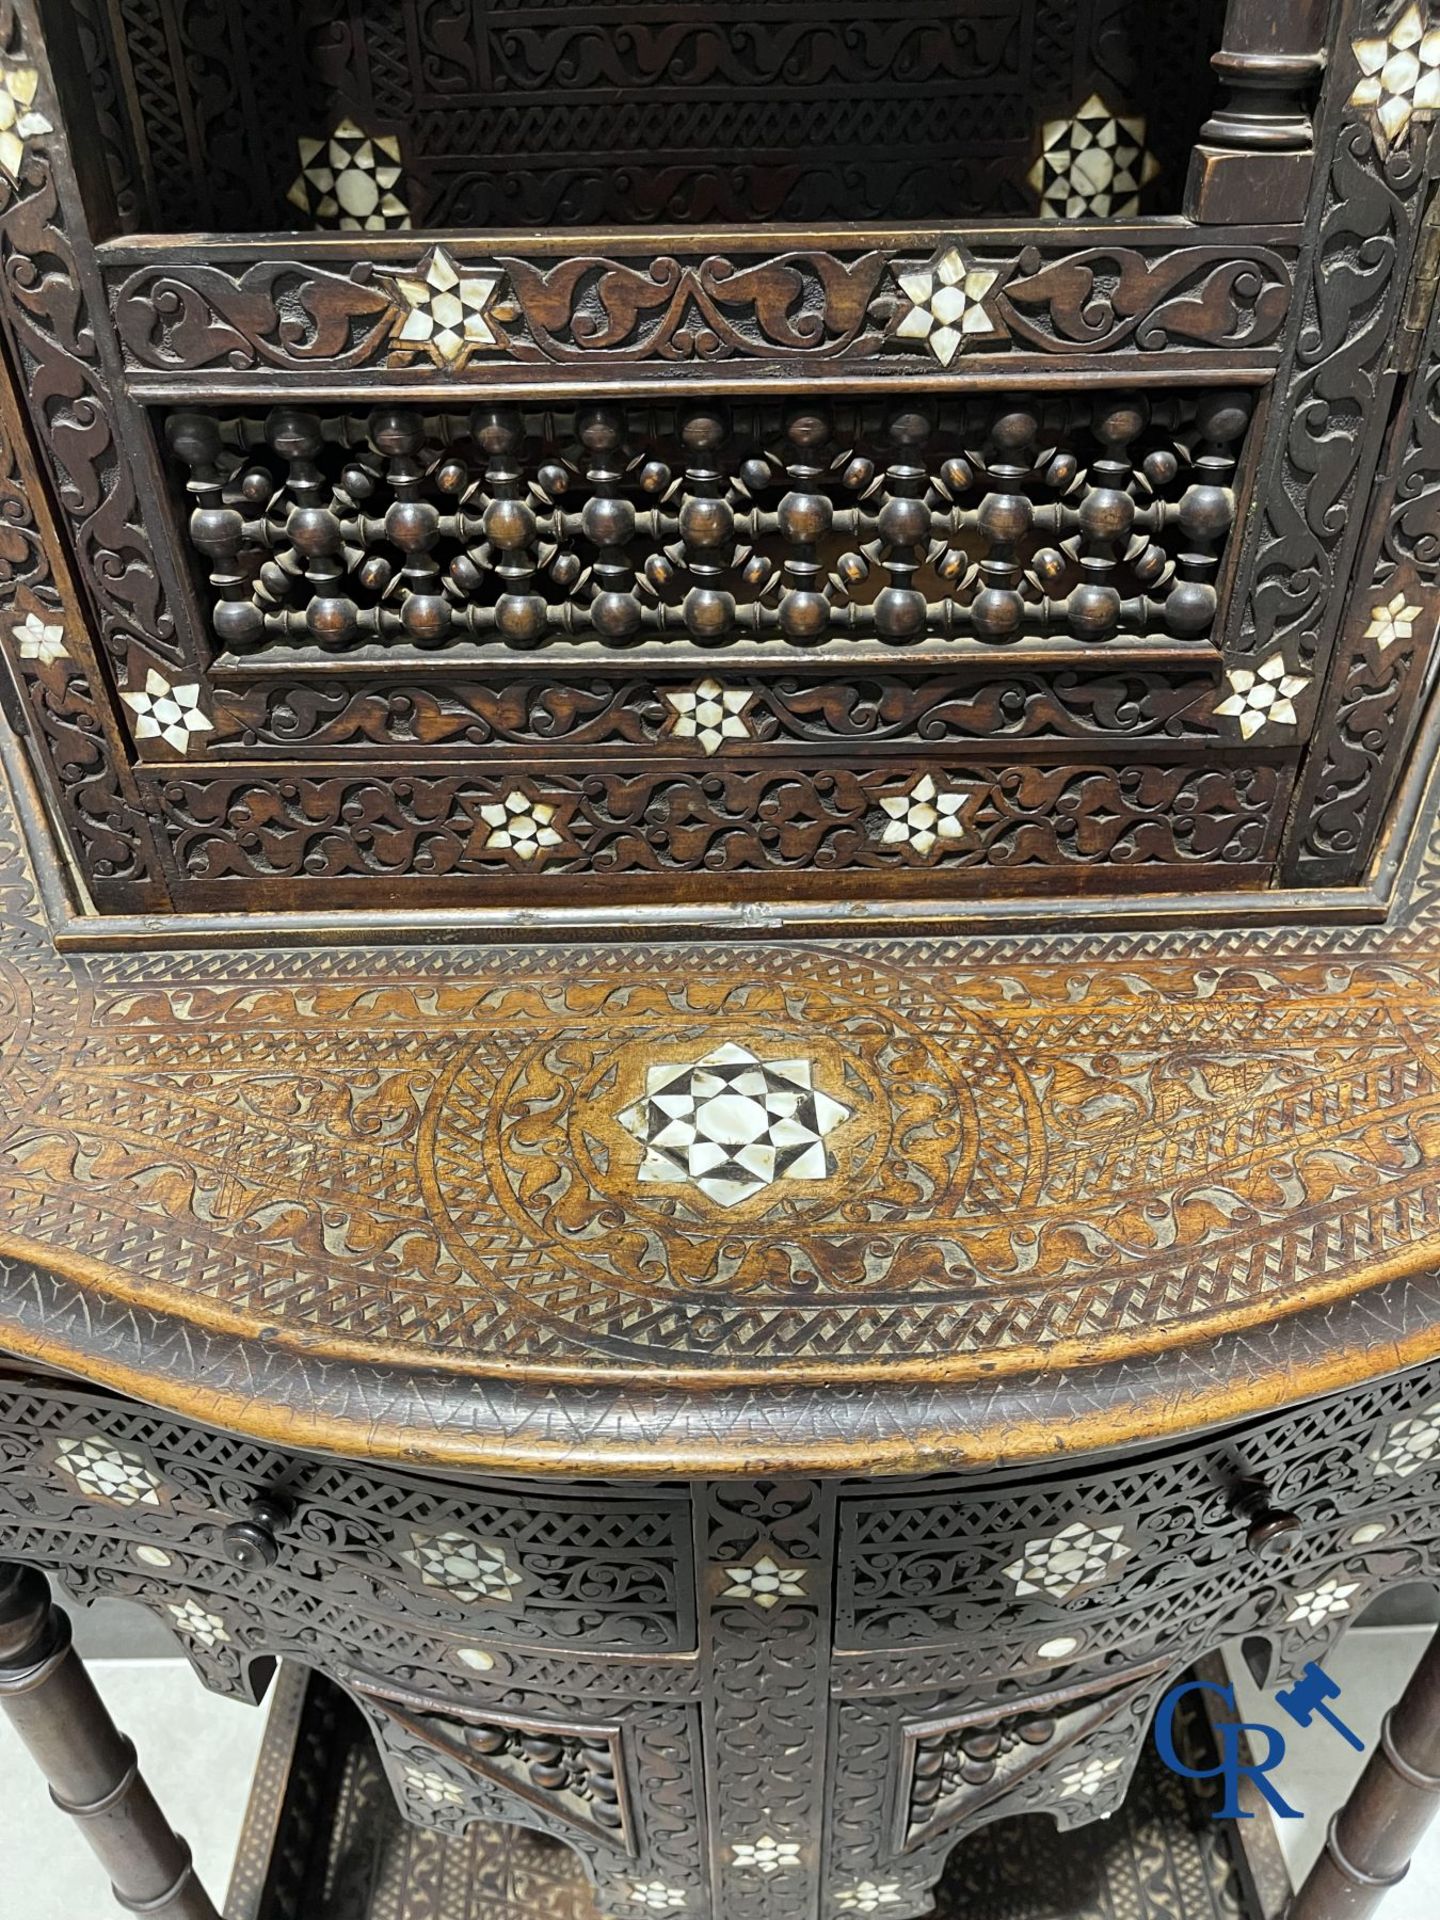 Sculpted furniture with inlays of ebony and mother-of-pearl. Syria, early 19th century. - Image 13 of 22